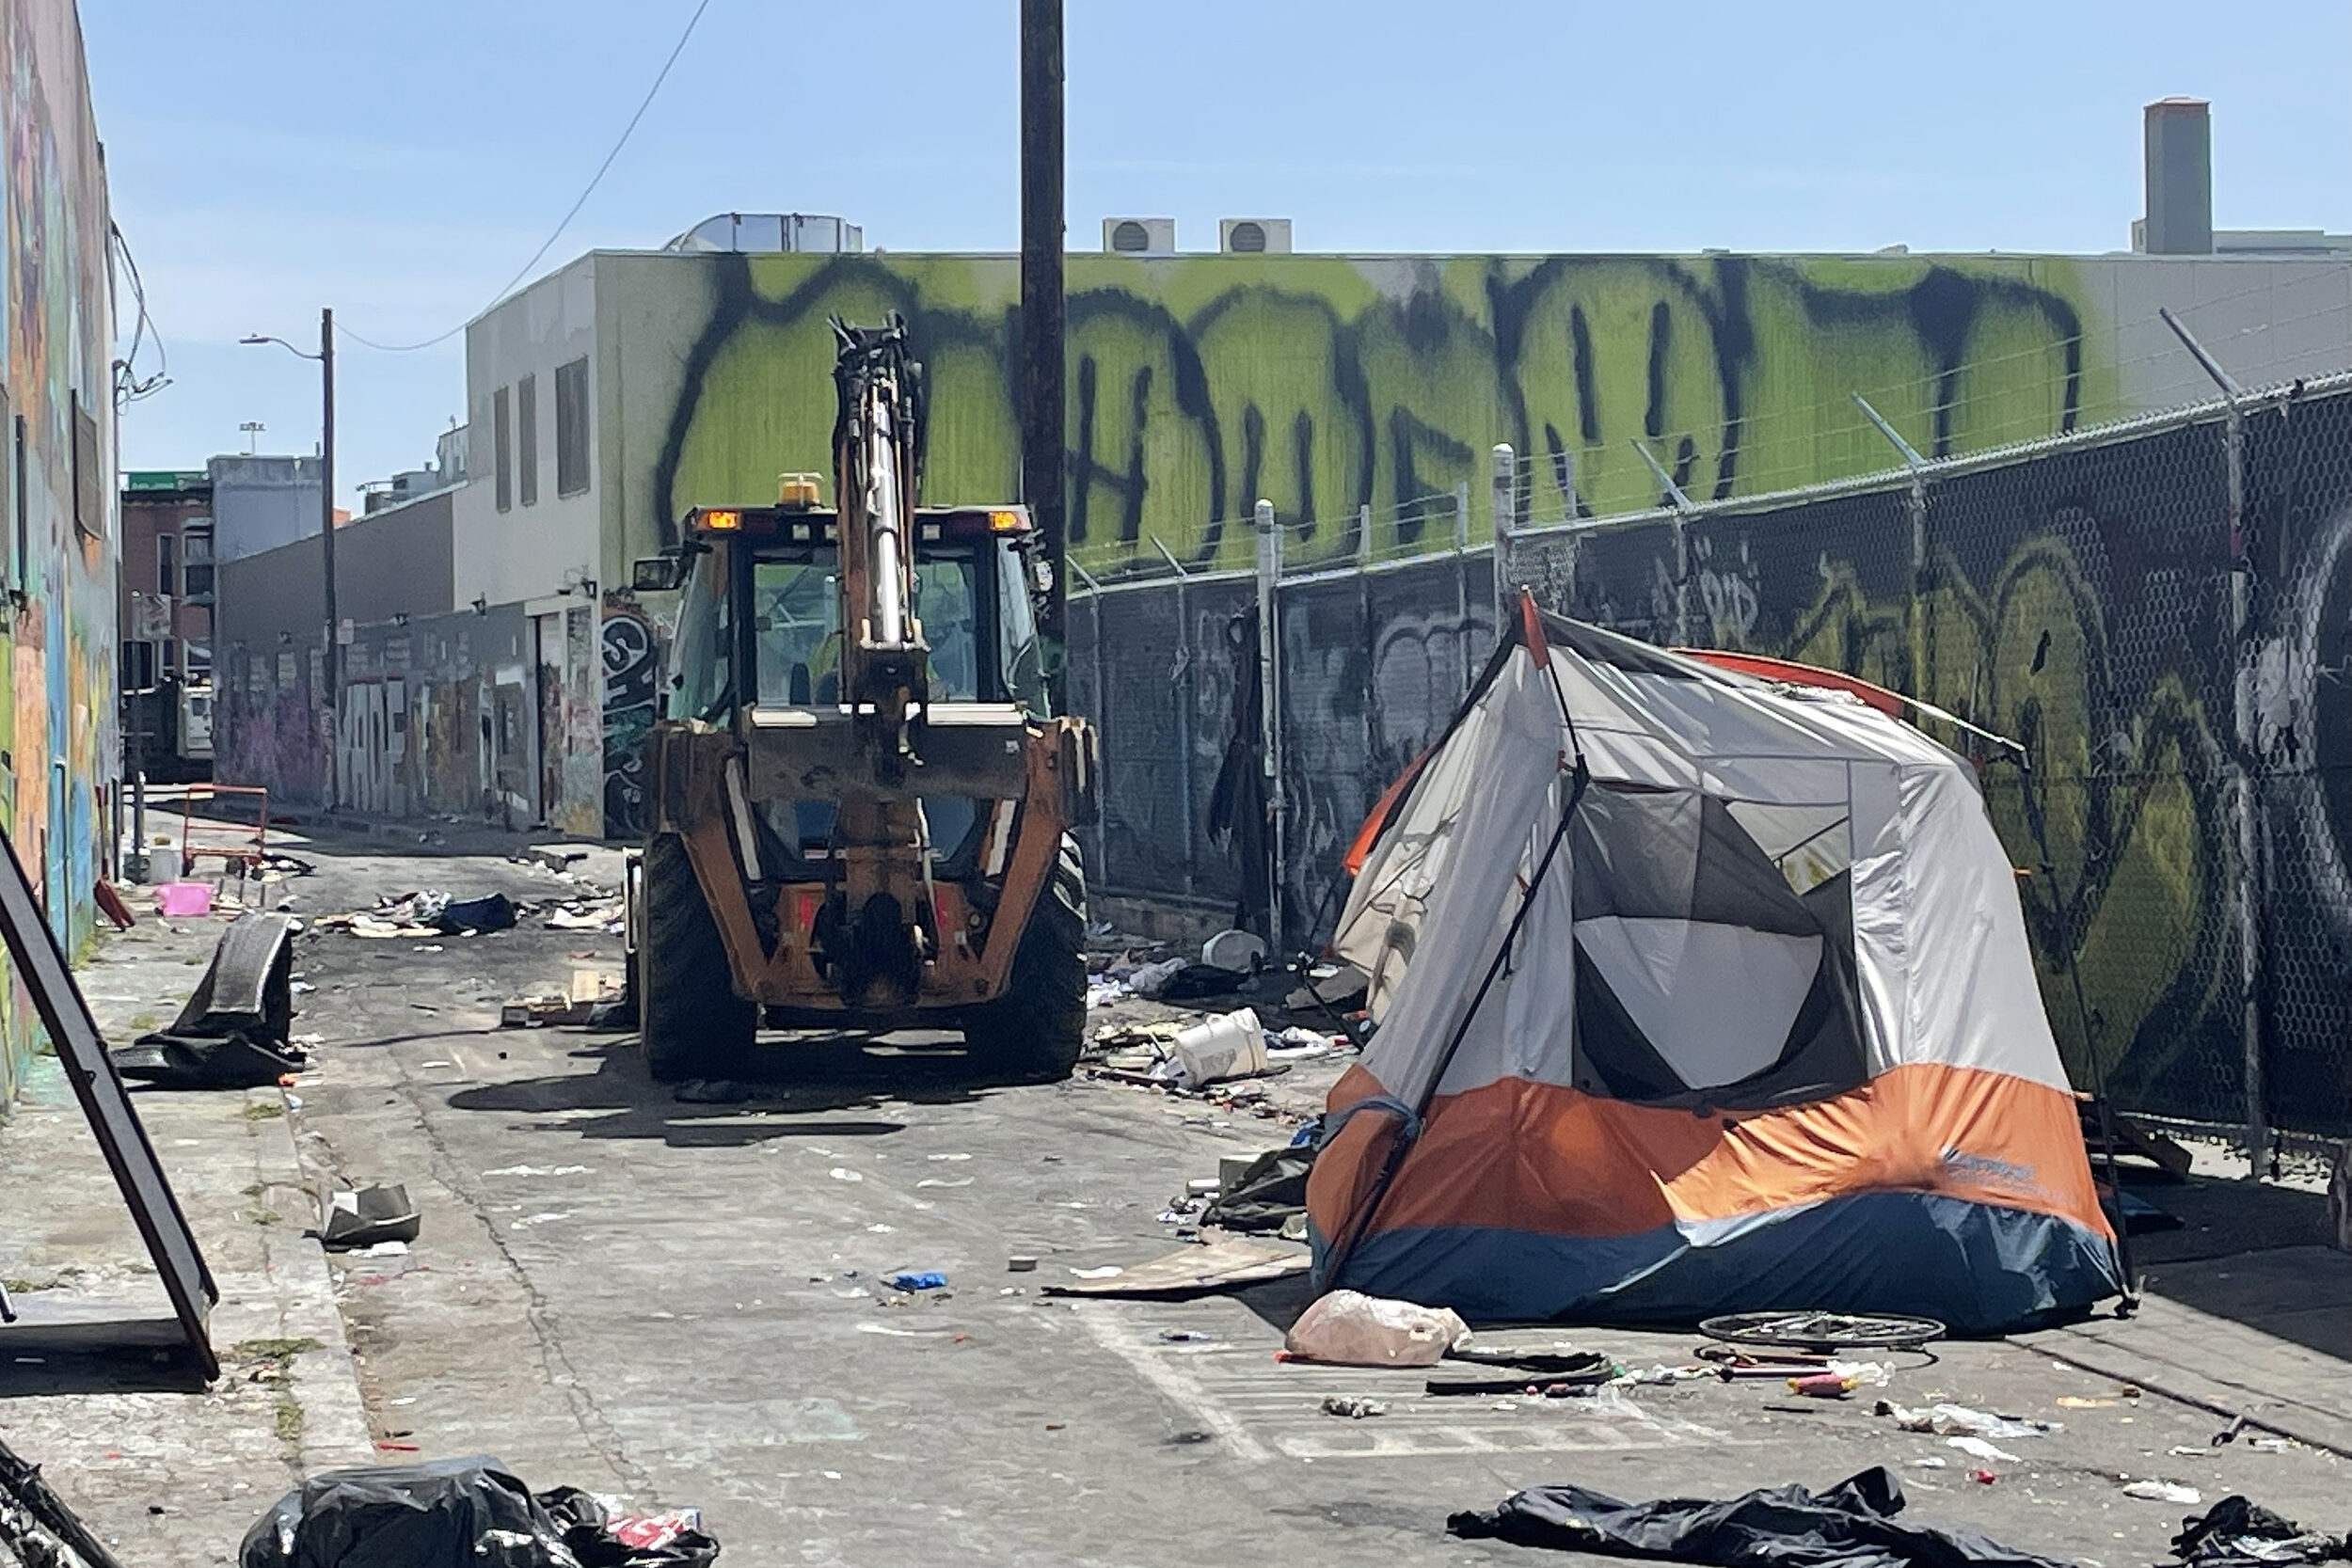 A backhoe near a tent surrounded by litter in a graffiti-covered city alley.